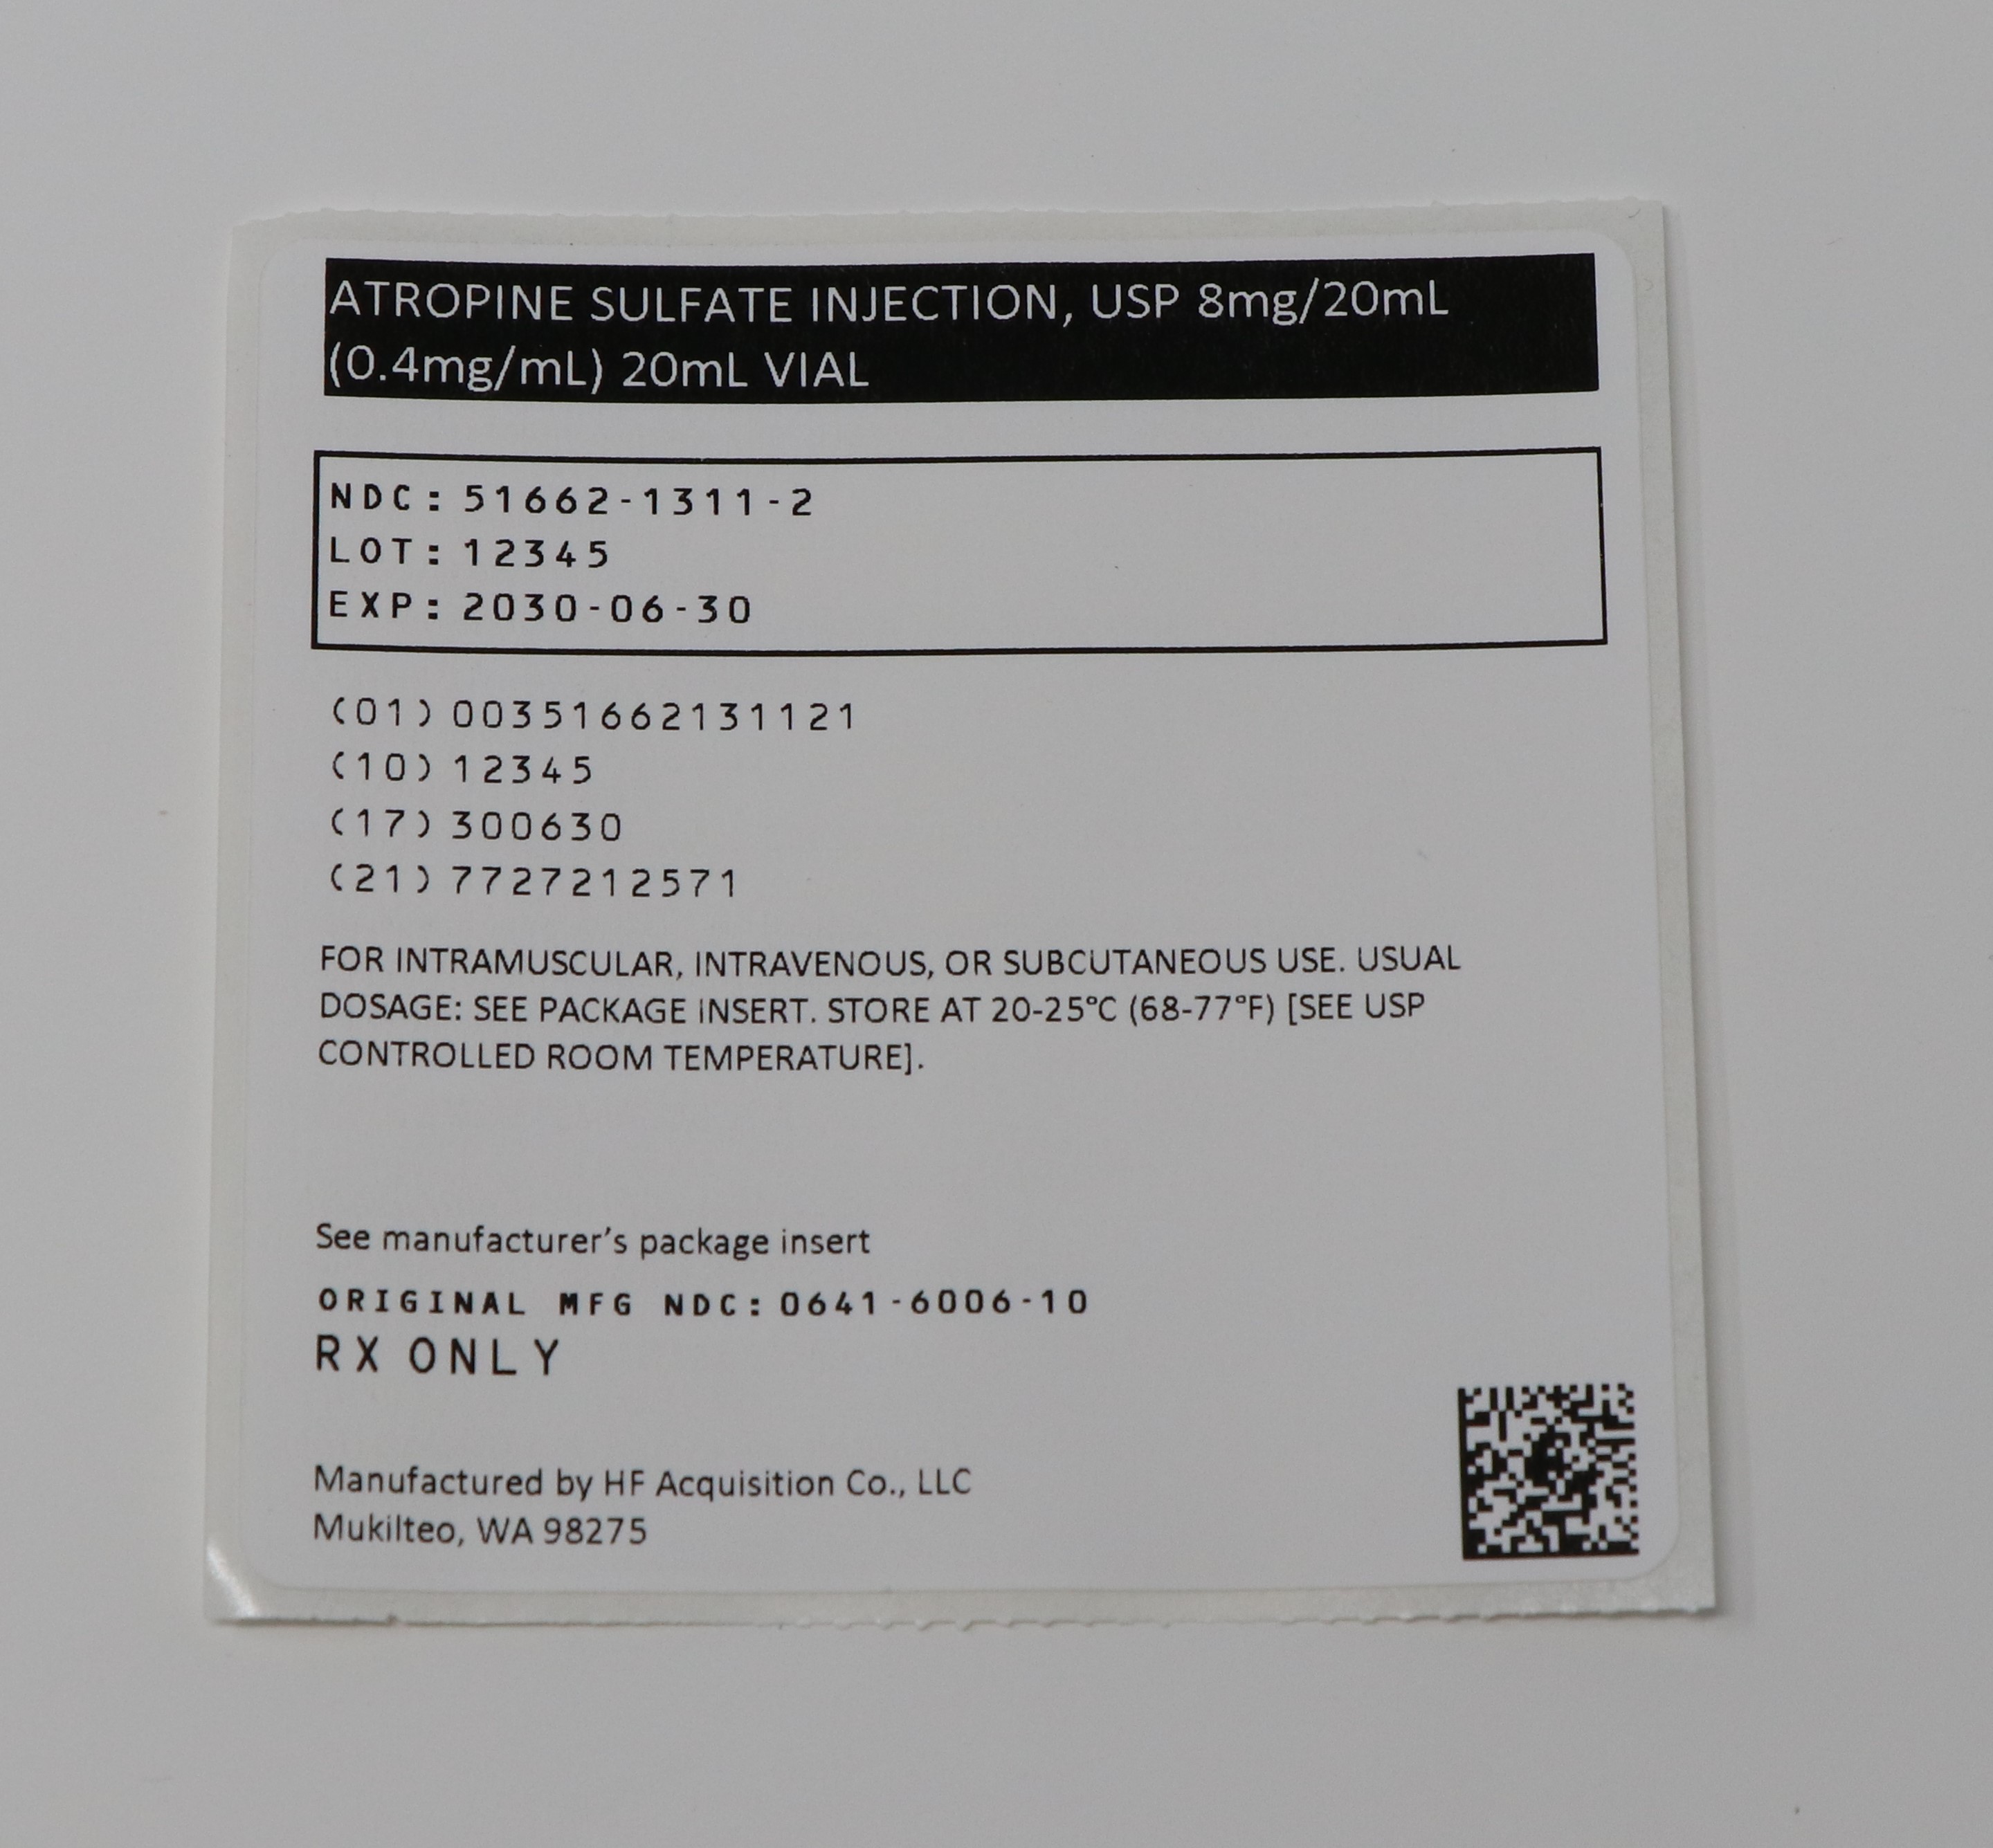 SERIALIZED POUCH LABEL